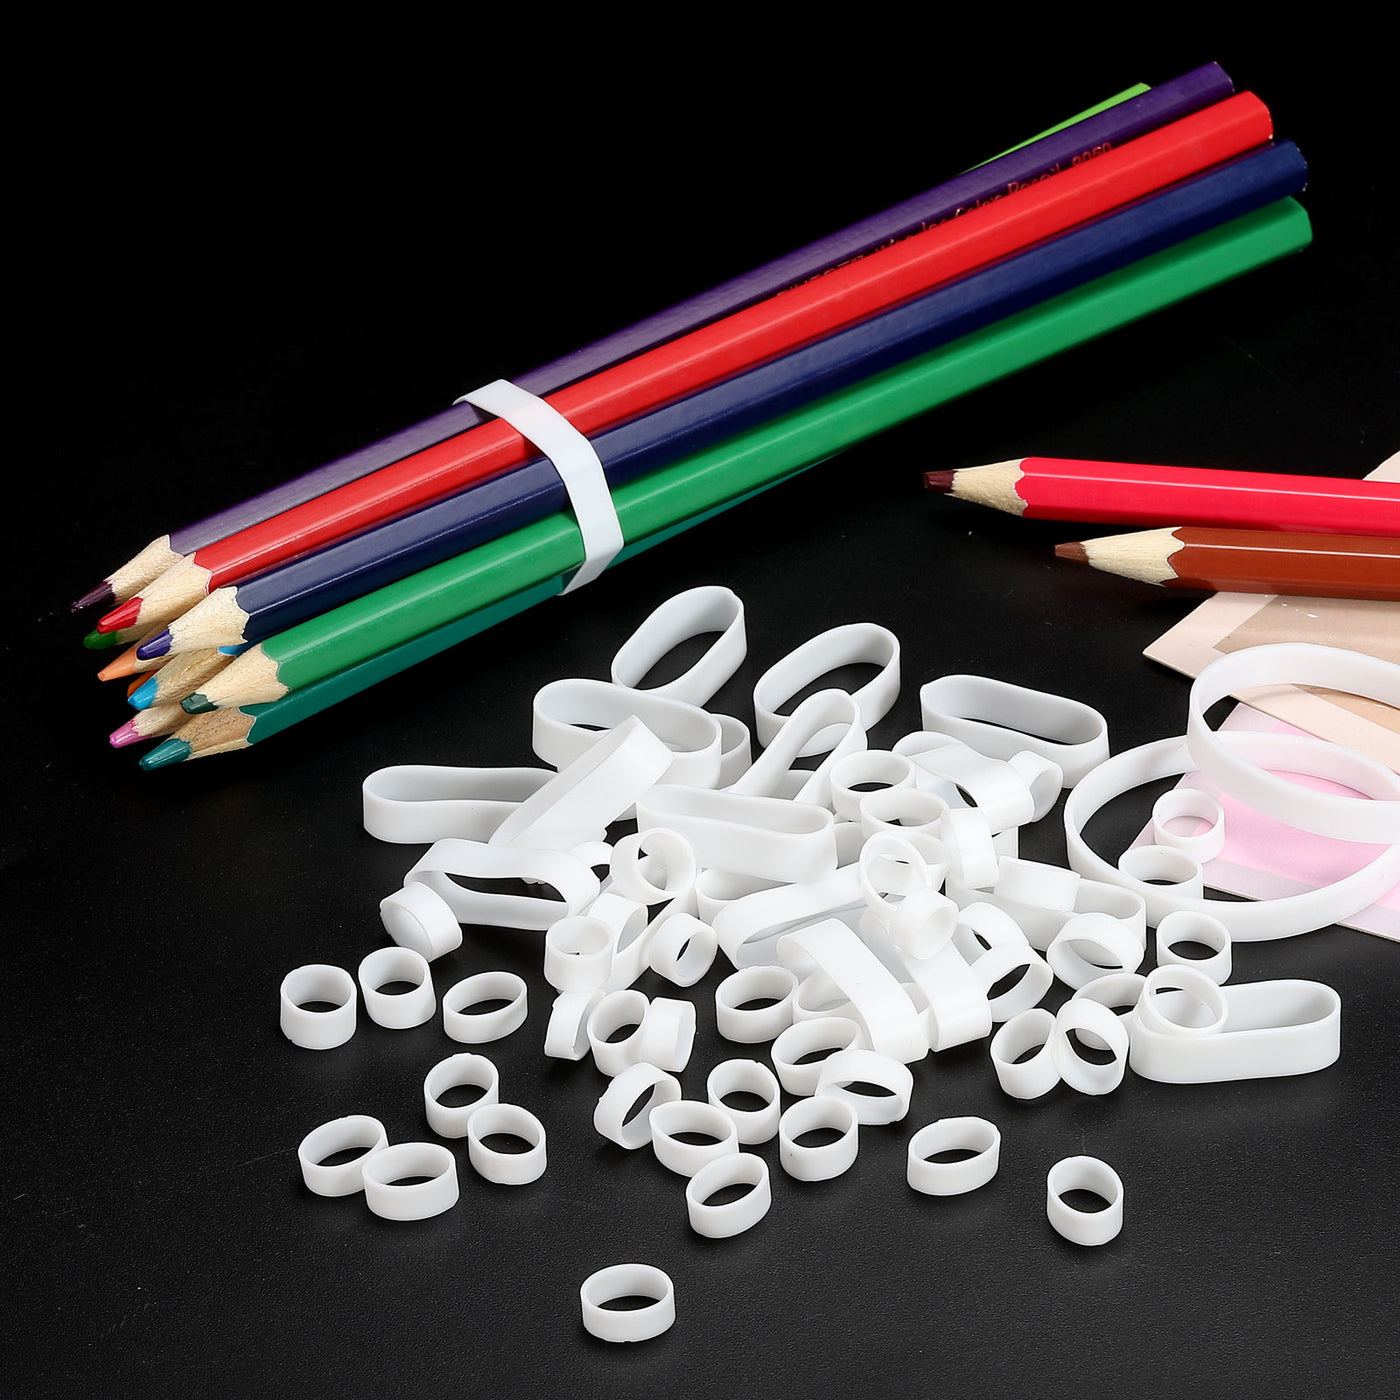 Harfington Silicone Rubber Bands Rings 50pcs Non-slip 1/2" Flat White for Books, Art, Boxes, Cord Wrapping, Bag Wraps